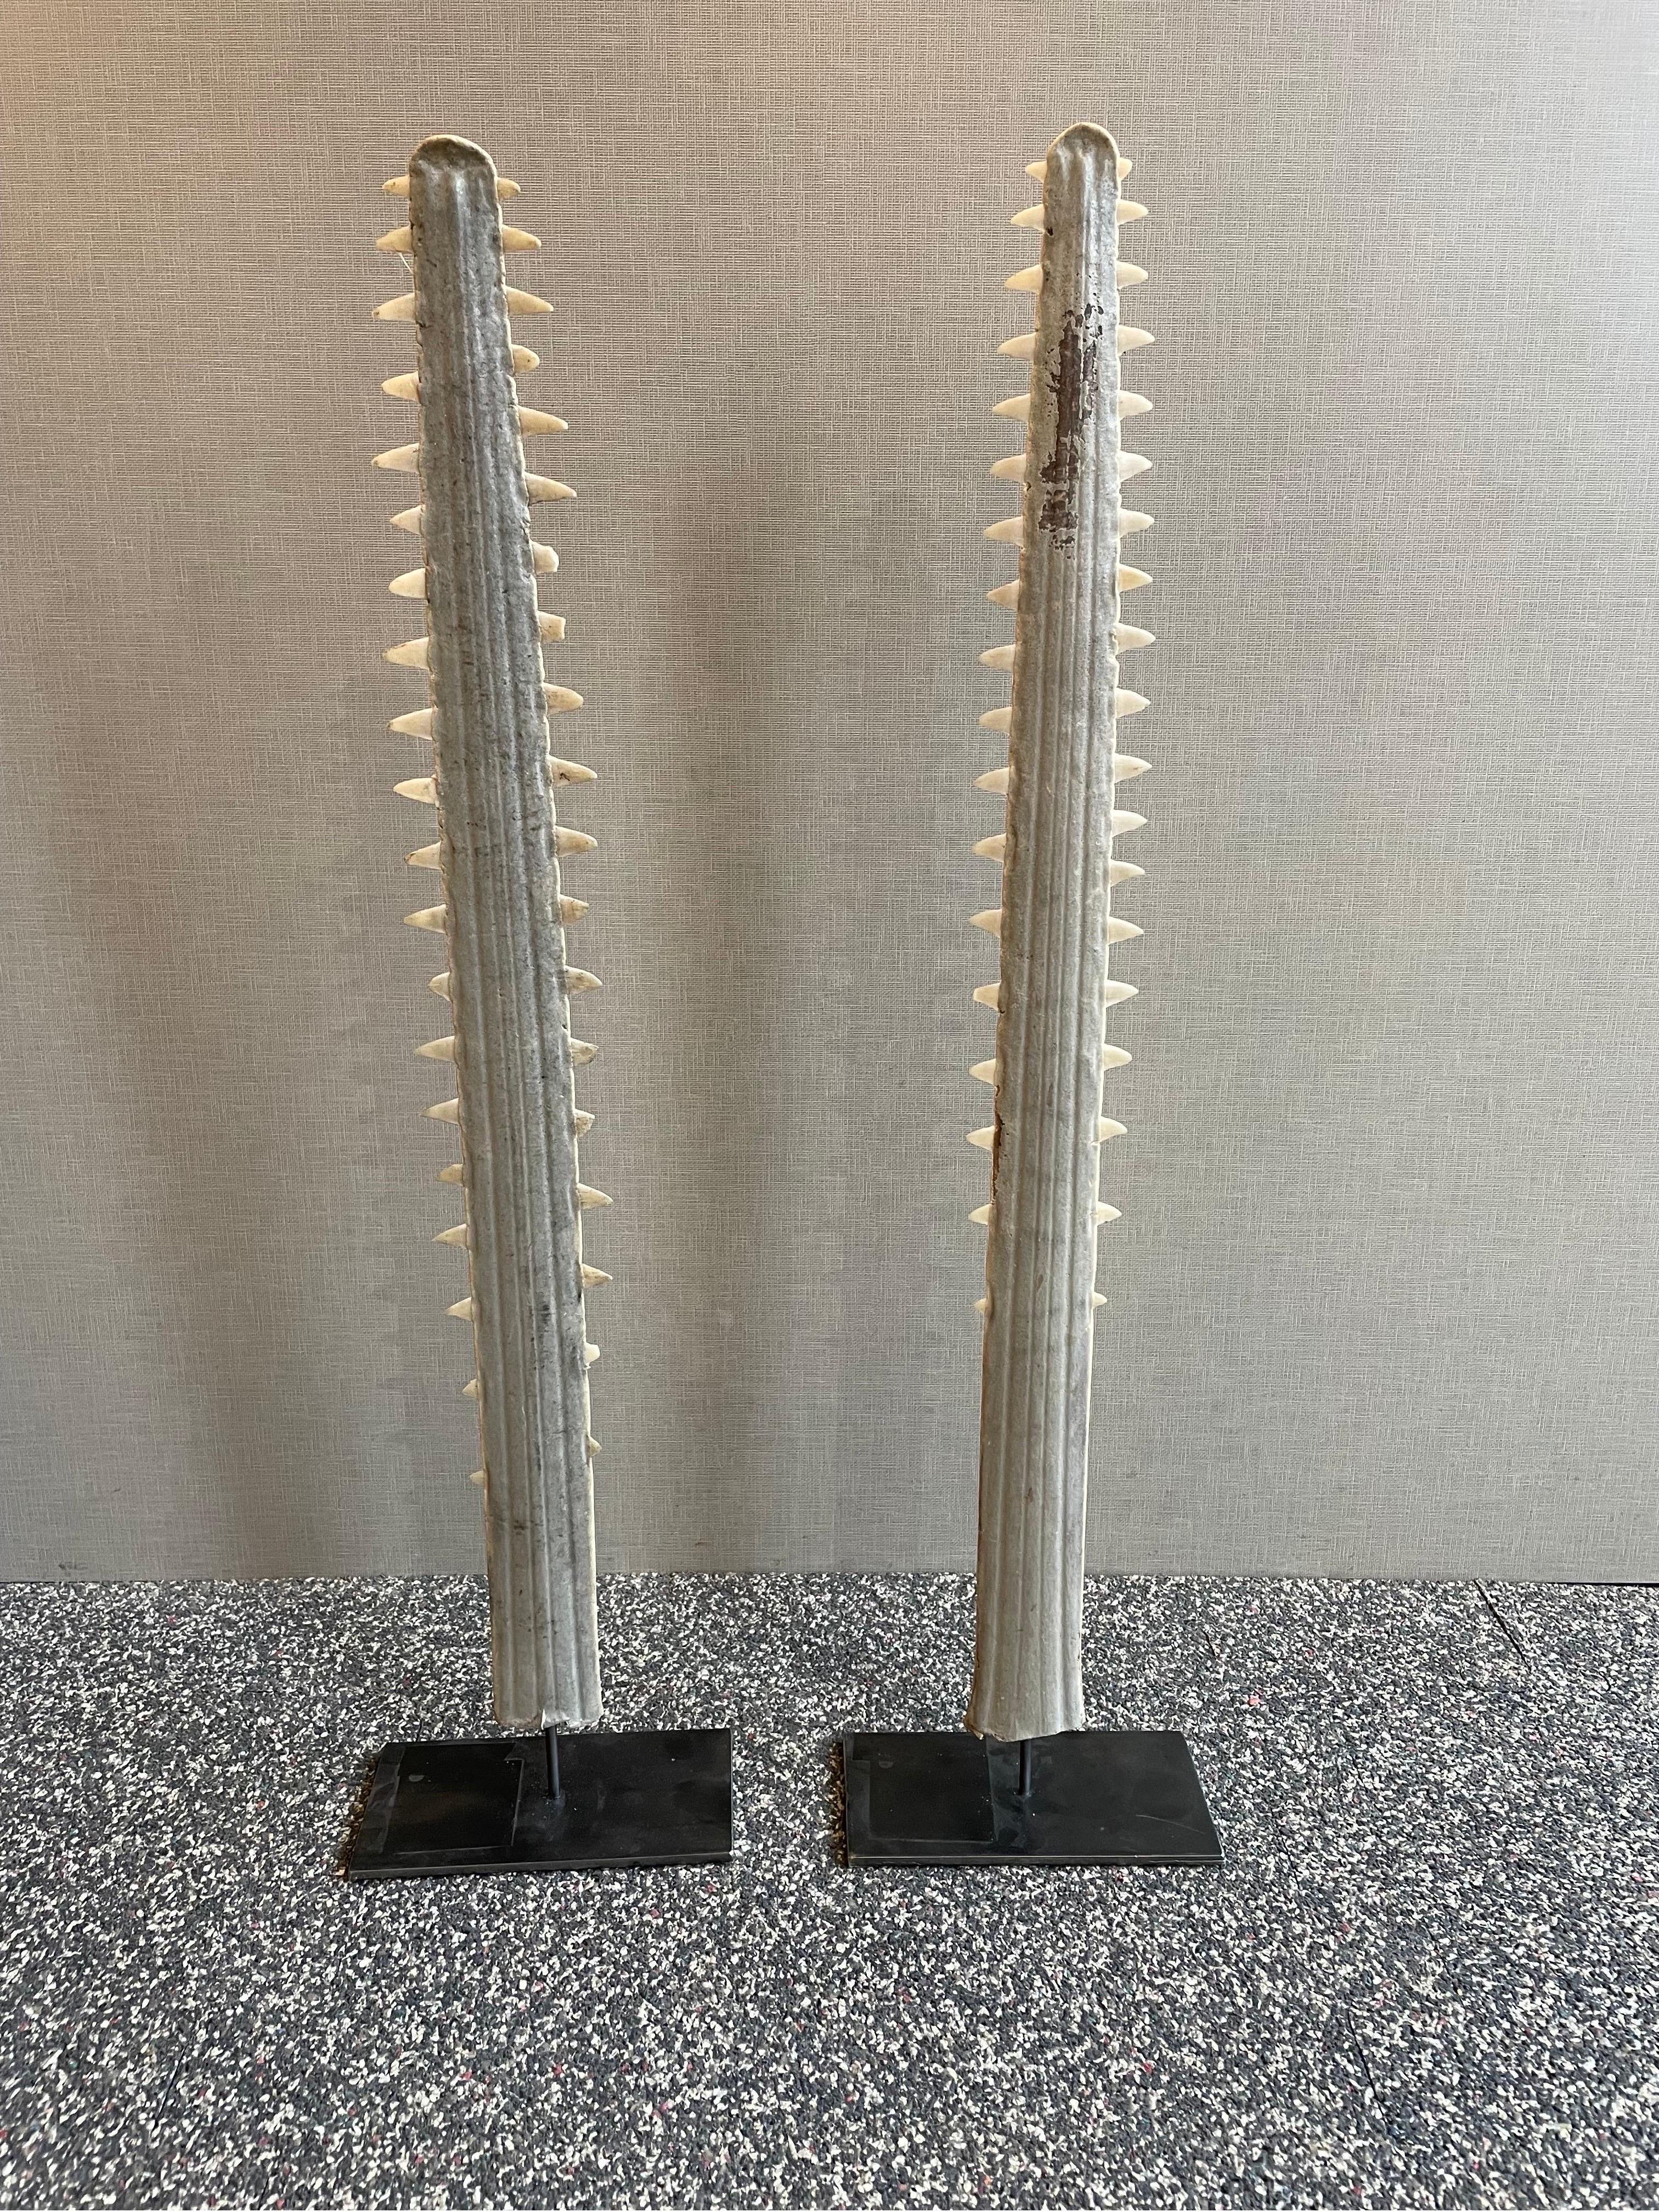 This is a great pair of saw tooth bills on metal stands 
They came from a wonderful collection of under the sea items from an avid collector.